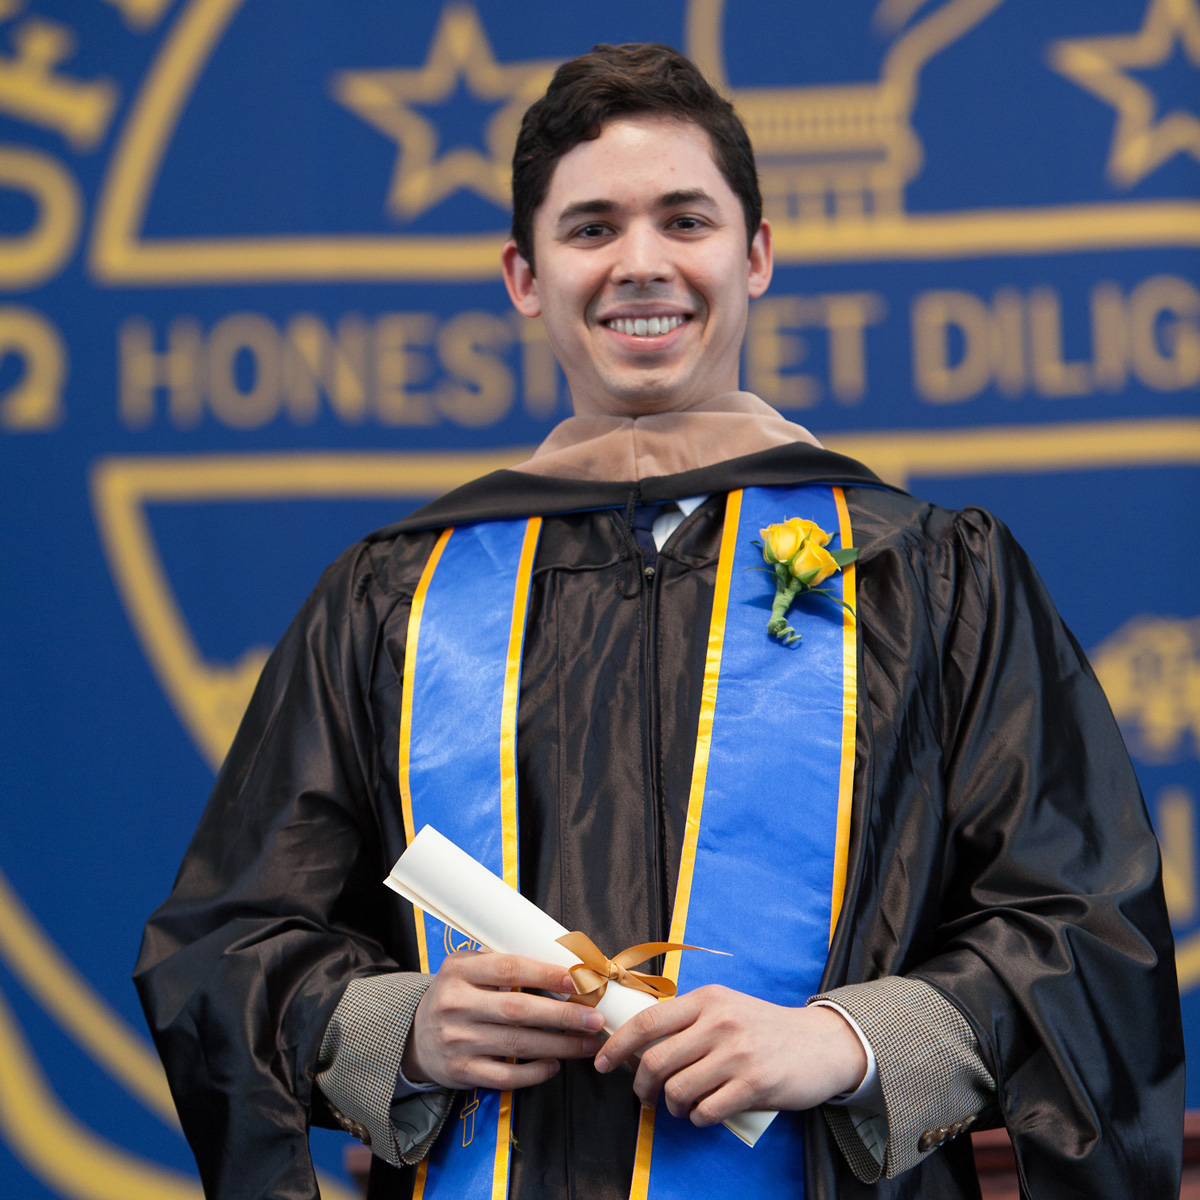 Rafael Sanchez holding his scroll on stage during Commencement ceremonies.